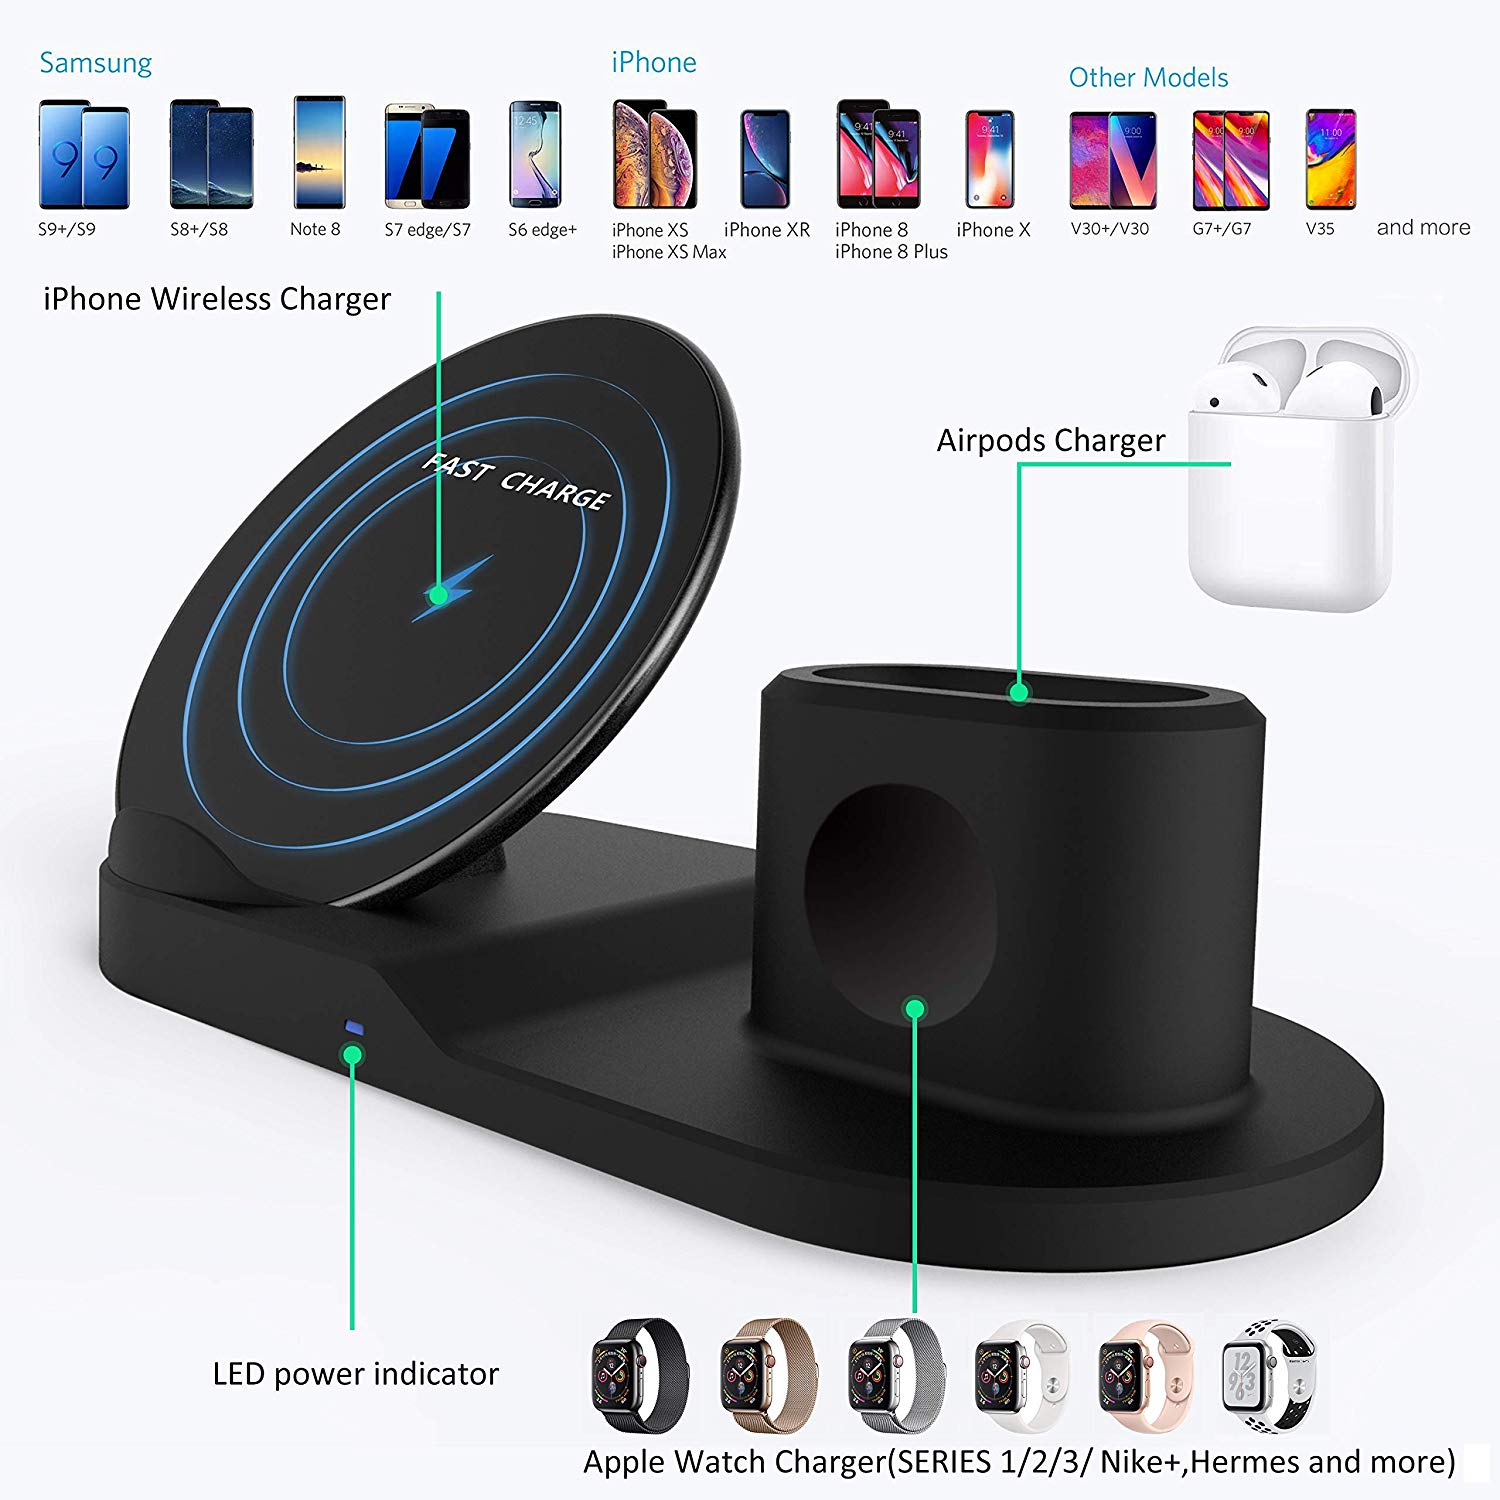 Wireless Charging Stand for Apple Watch Series 3/2/1, Charging stand for AirPods,3 in1 wireless charger stand for iPhone Xs/XS MAX/XR/X/8/8 Plus,Sumsung and all other QI-Enable Devices - image 3 of 8